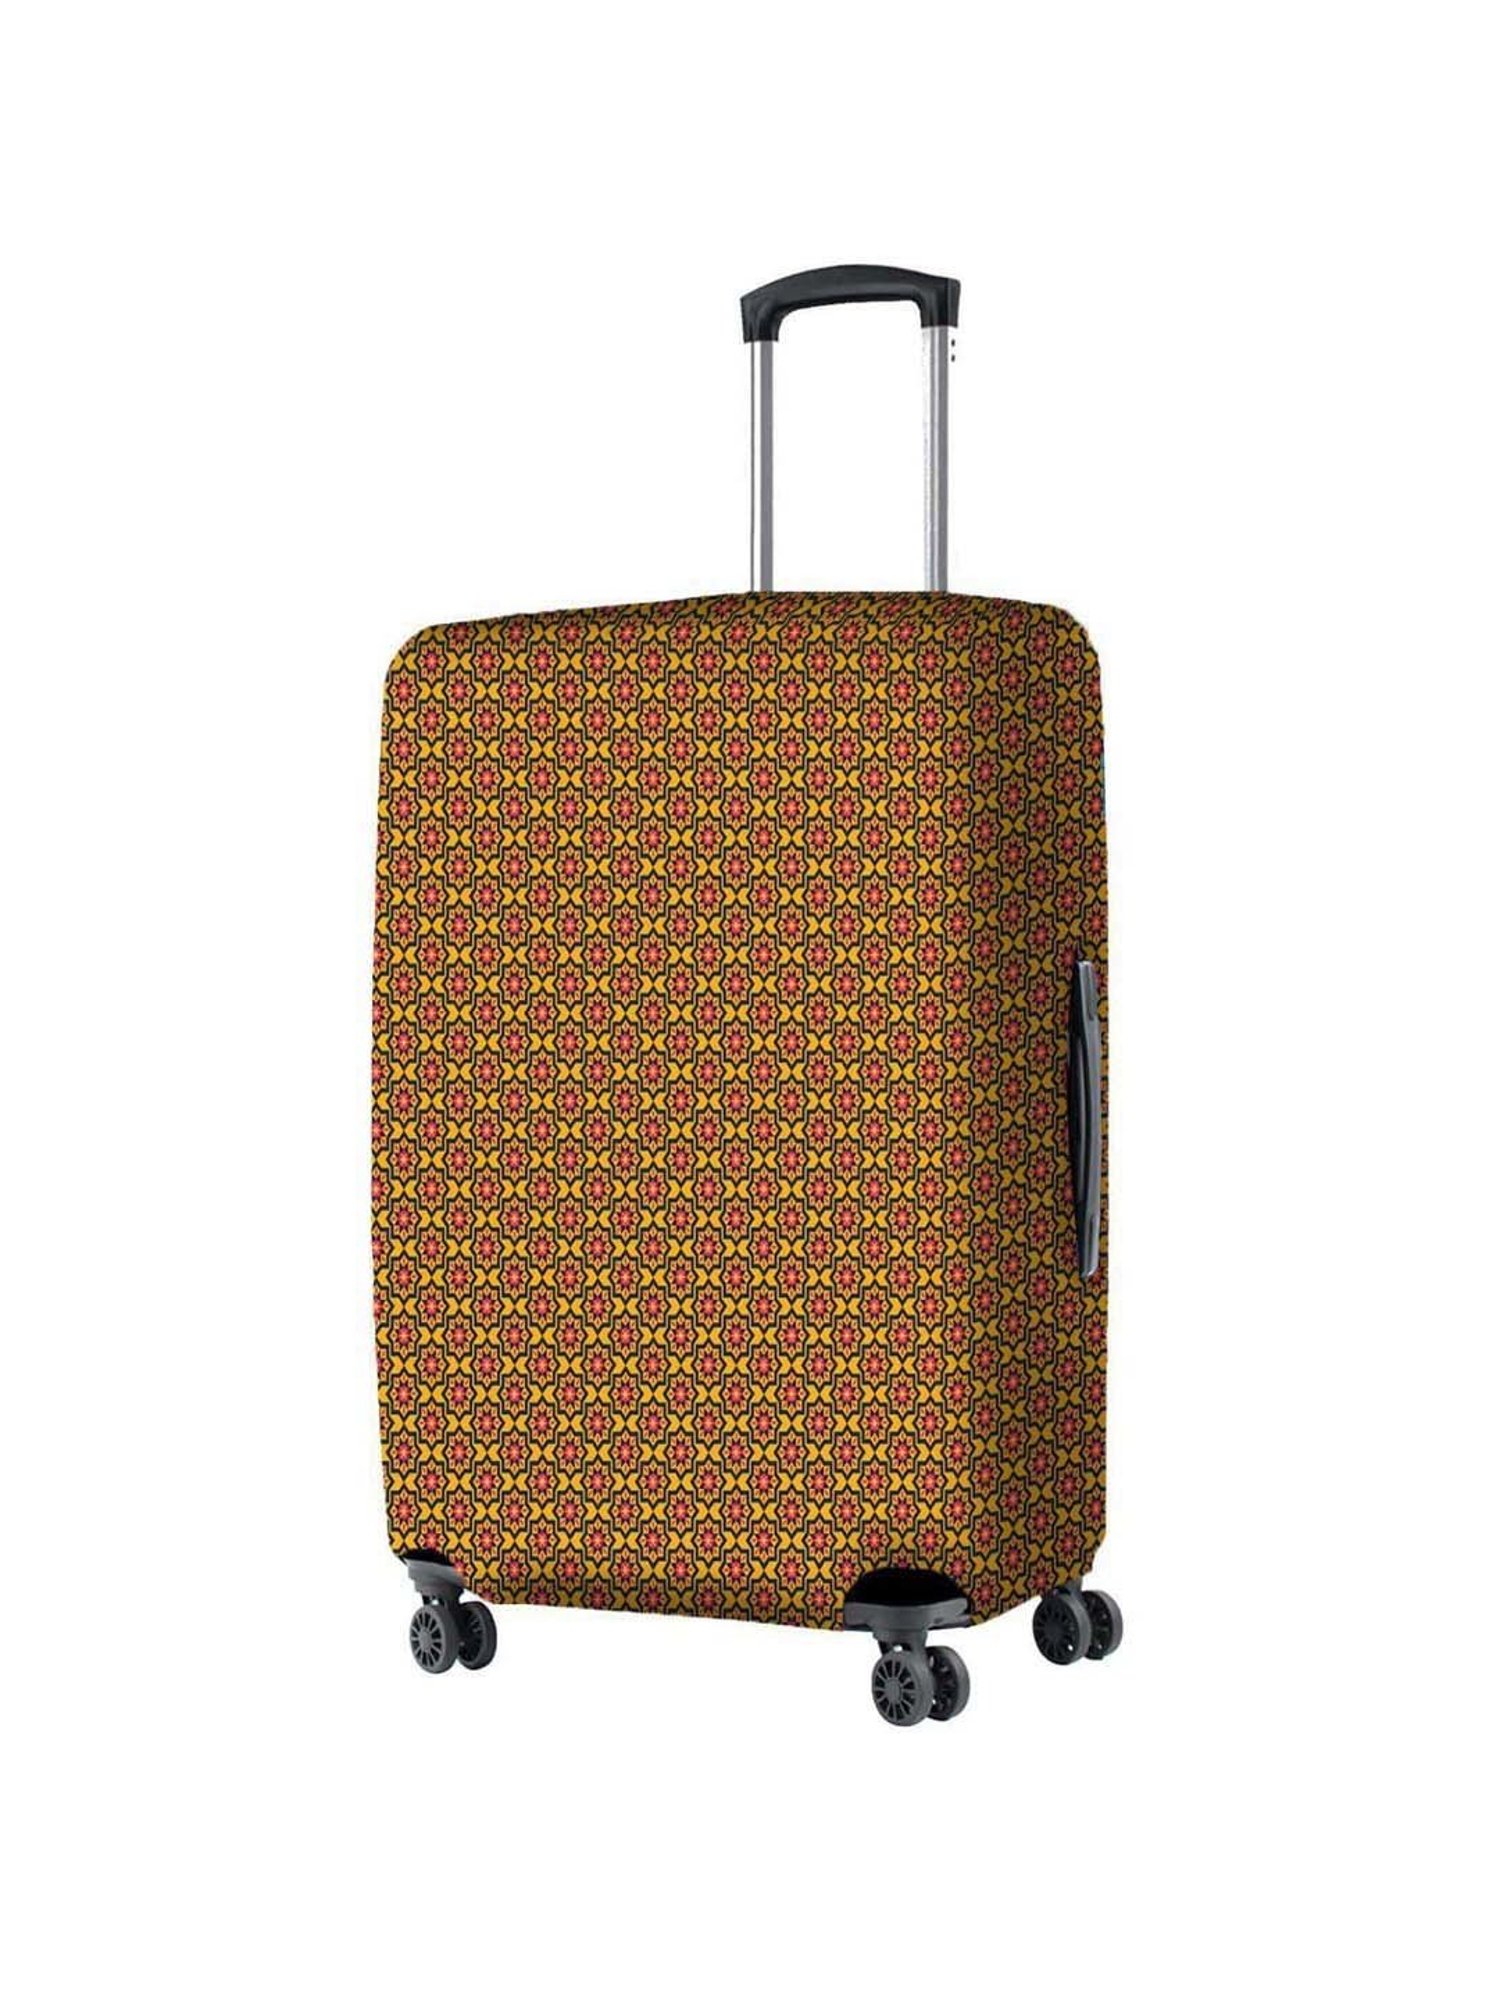 BIGWING Map Print Polyester Fabric (20' Inch) Small Size Protective Hard Luggage  Trolley Bag Cover (Fits Only On Fiber/Plastic Trolley Bag) : Amazon.in:  Fashion